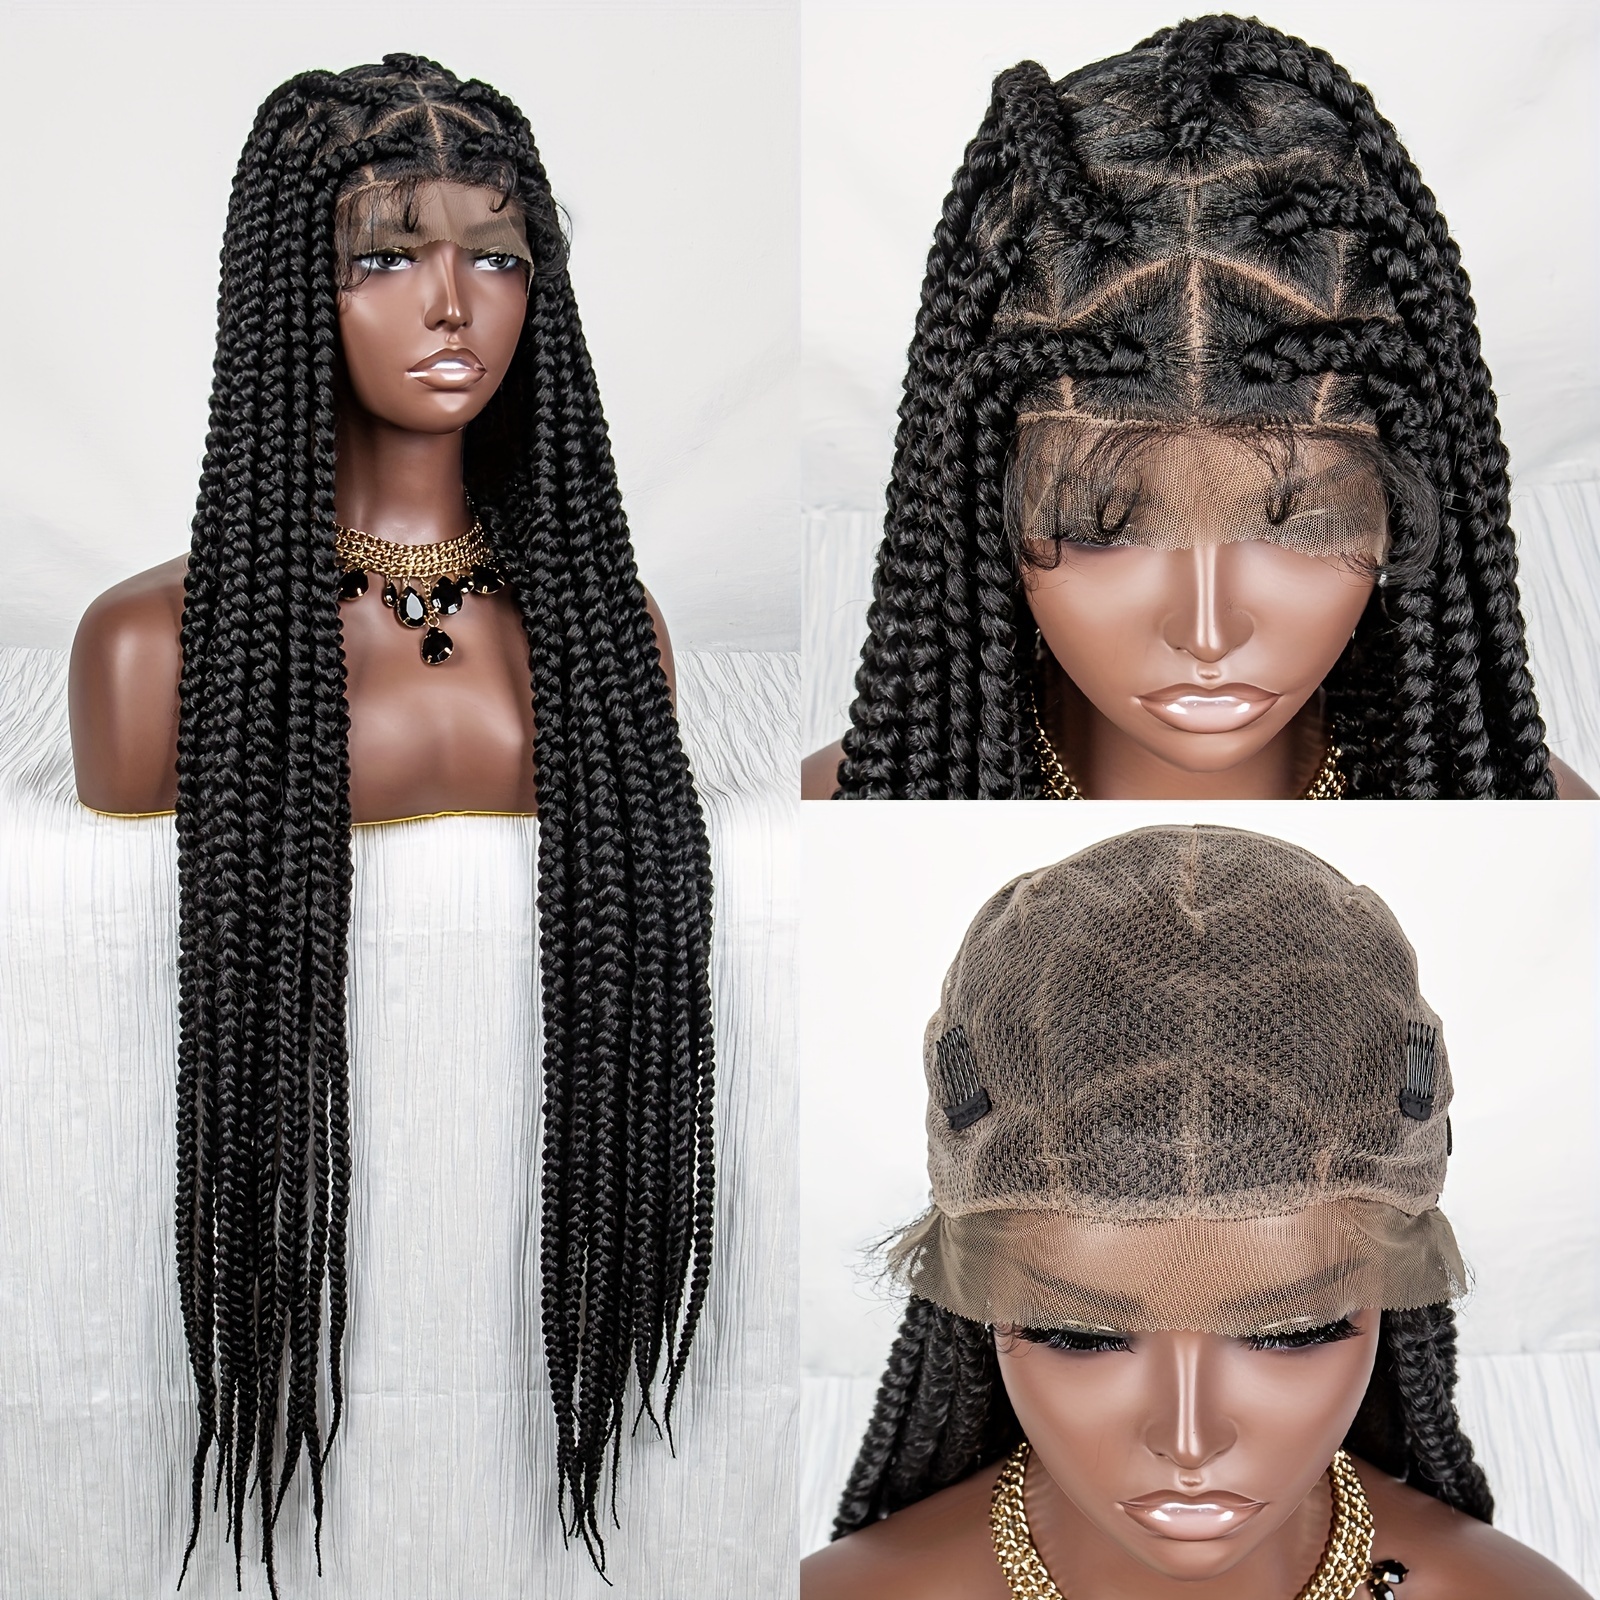 Black Ombre Blue Lace Box Braided Wigs For Women Full Lace Box Braids Wigs  Synthetic Long Lightweight Hair Wigs